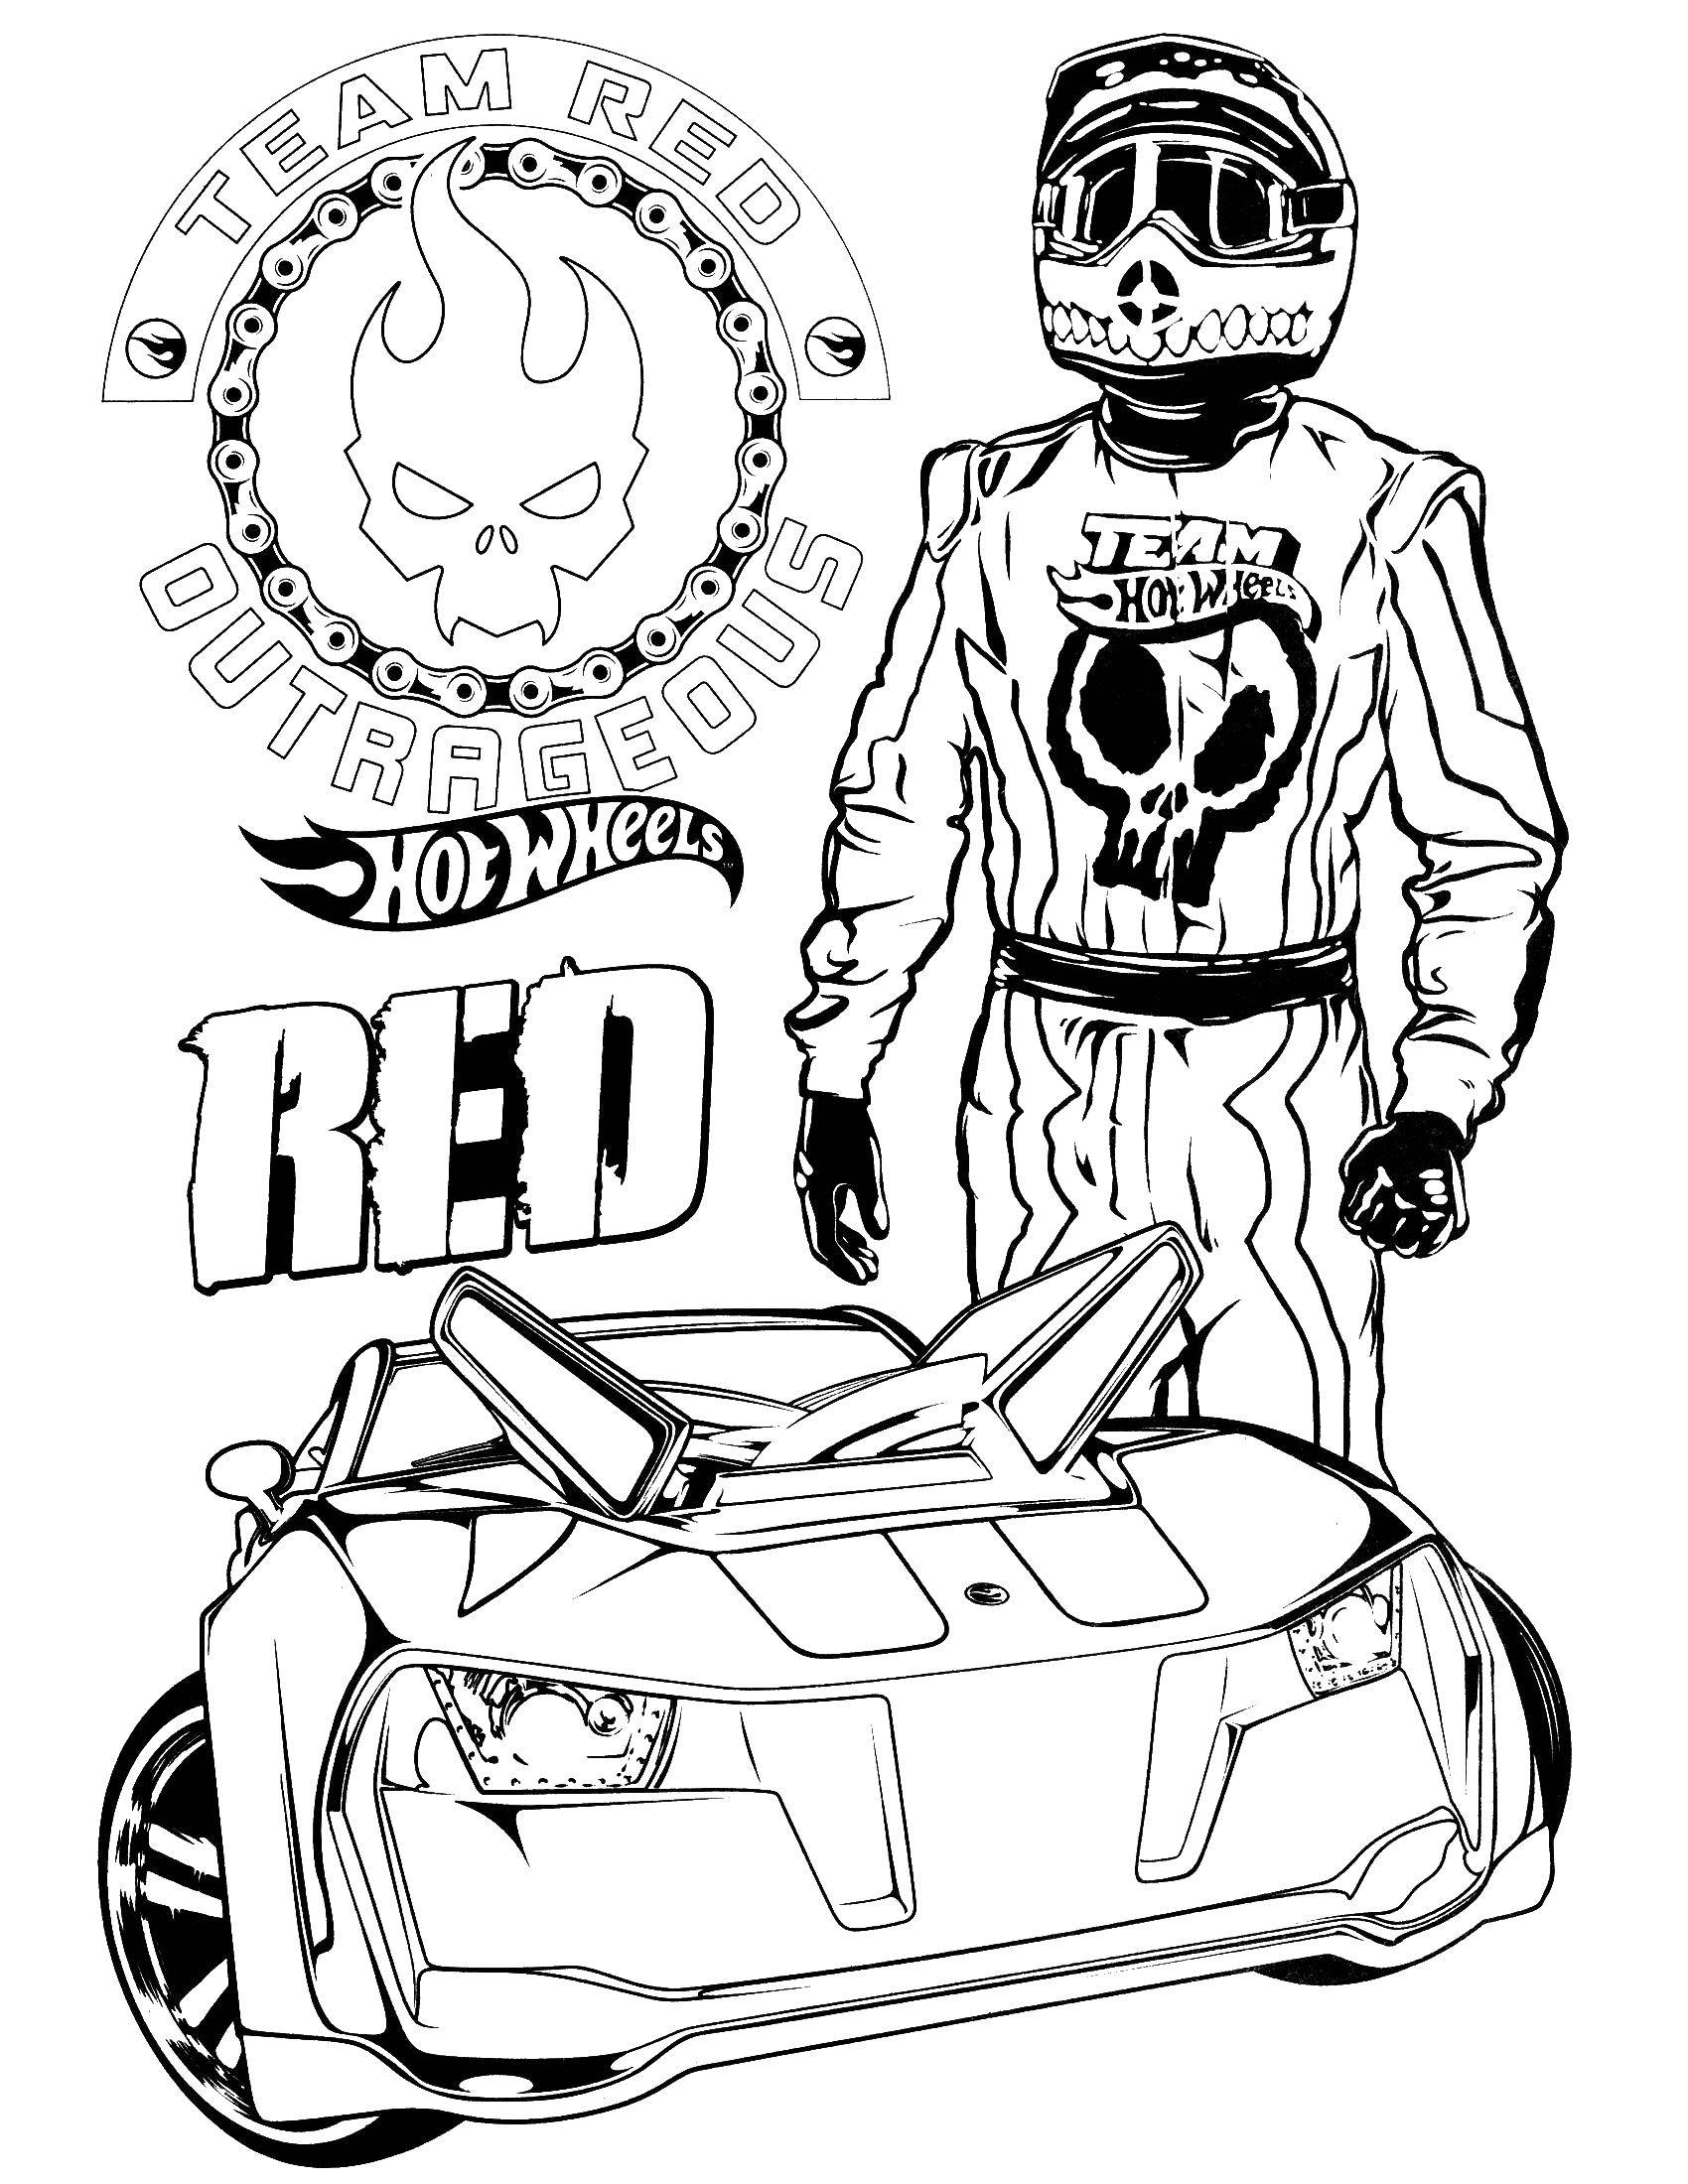 Coloring Racer. Category machine . Tags:  car, racer, race.